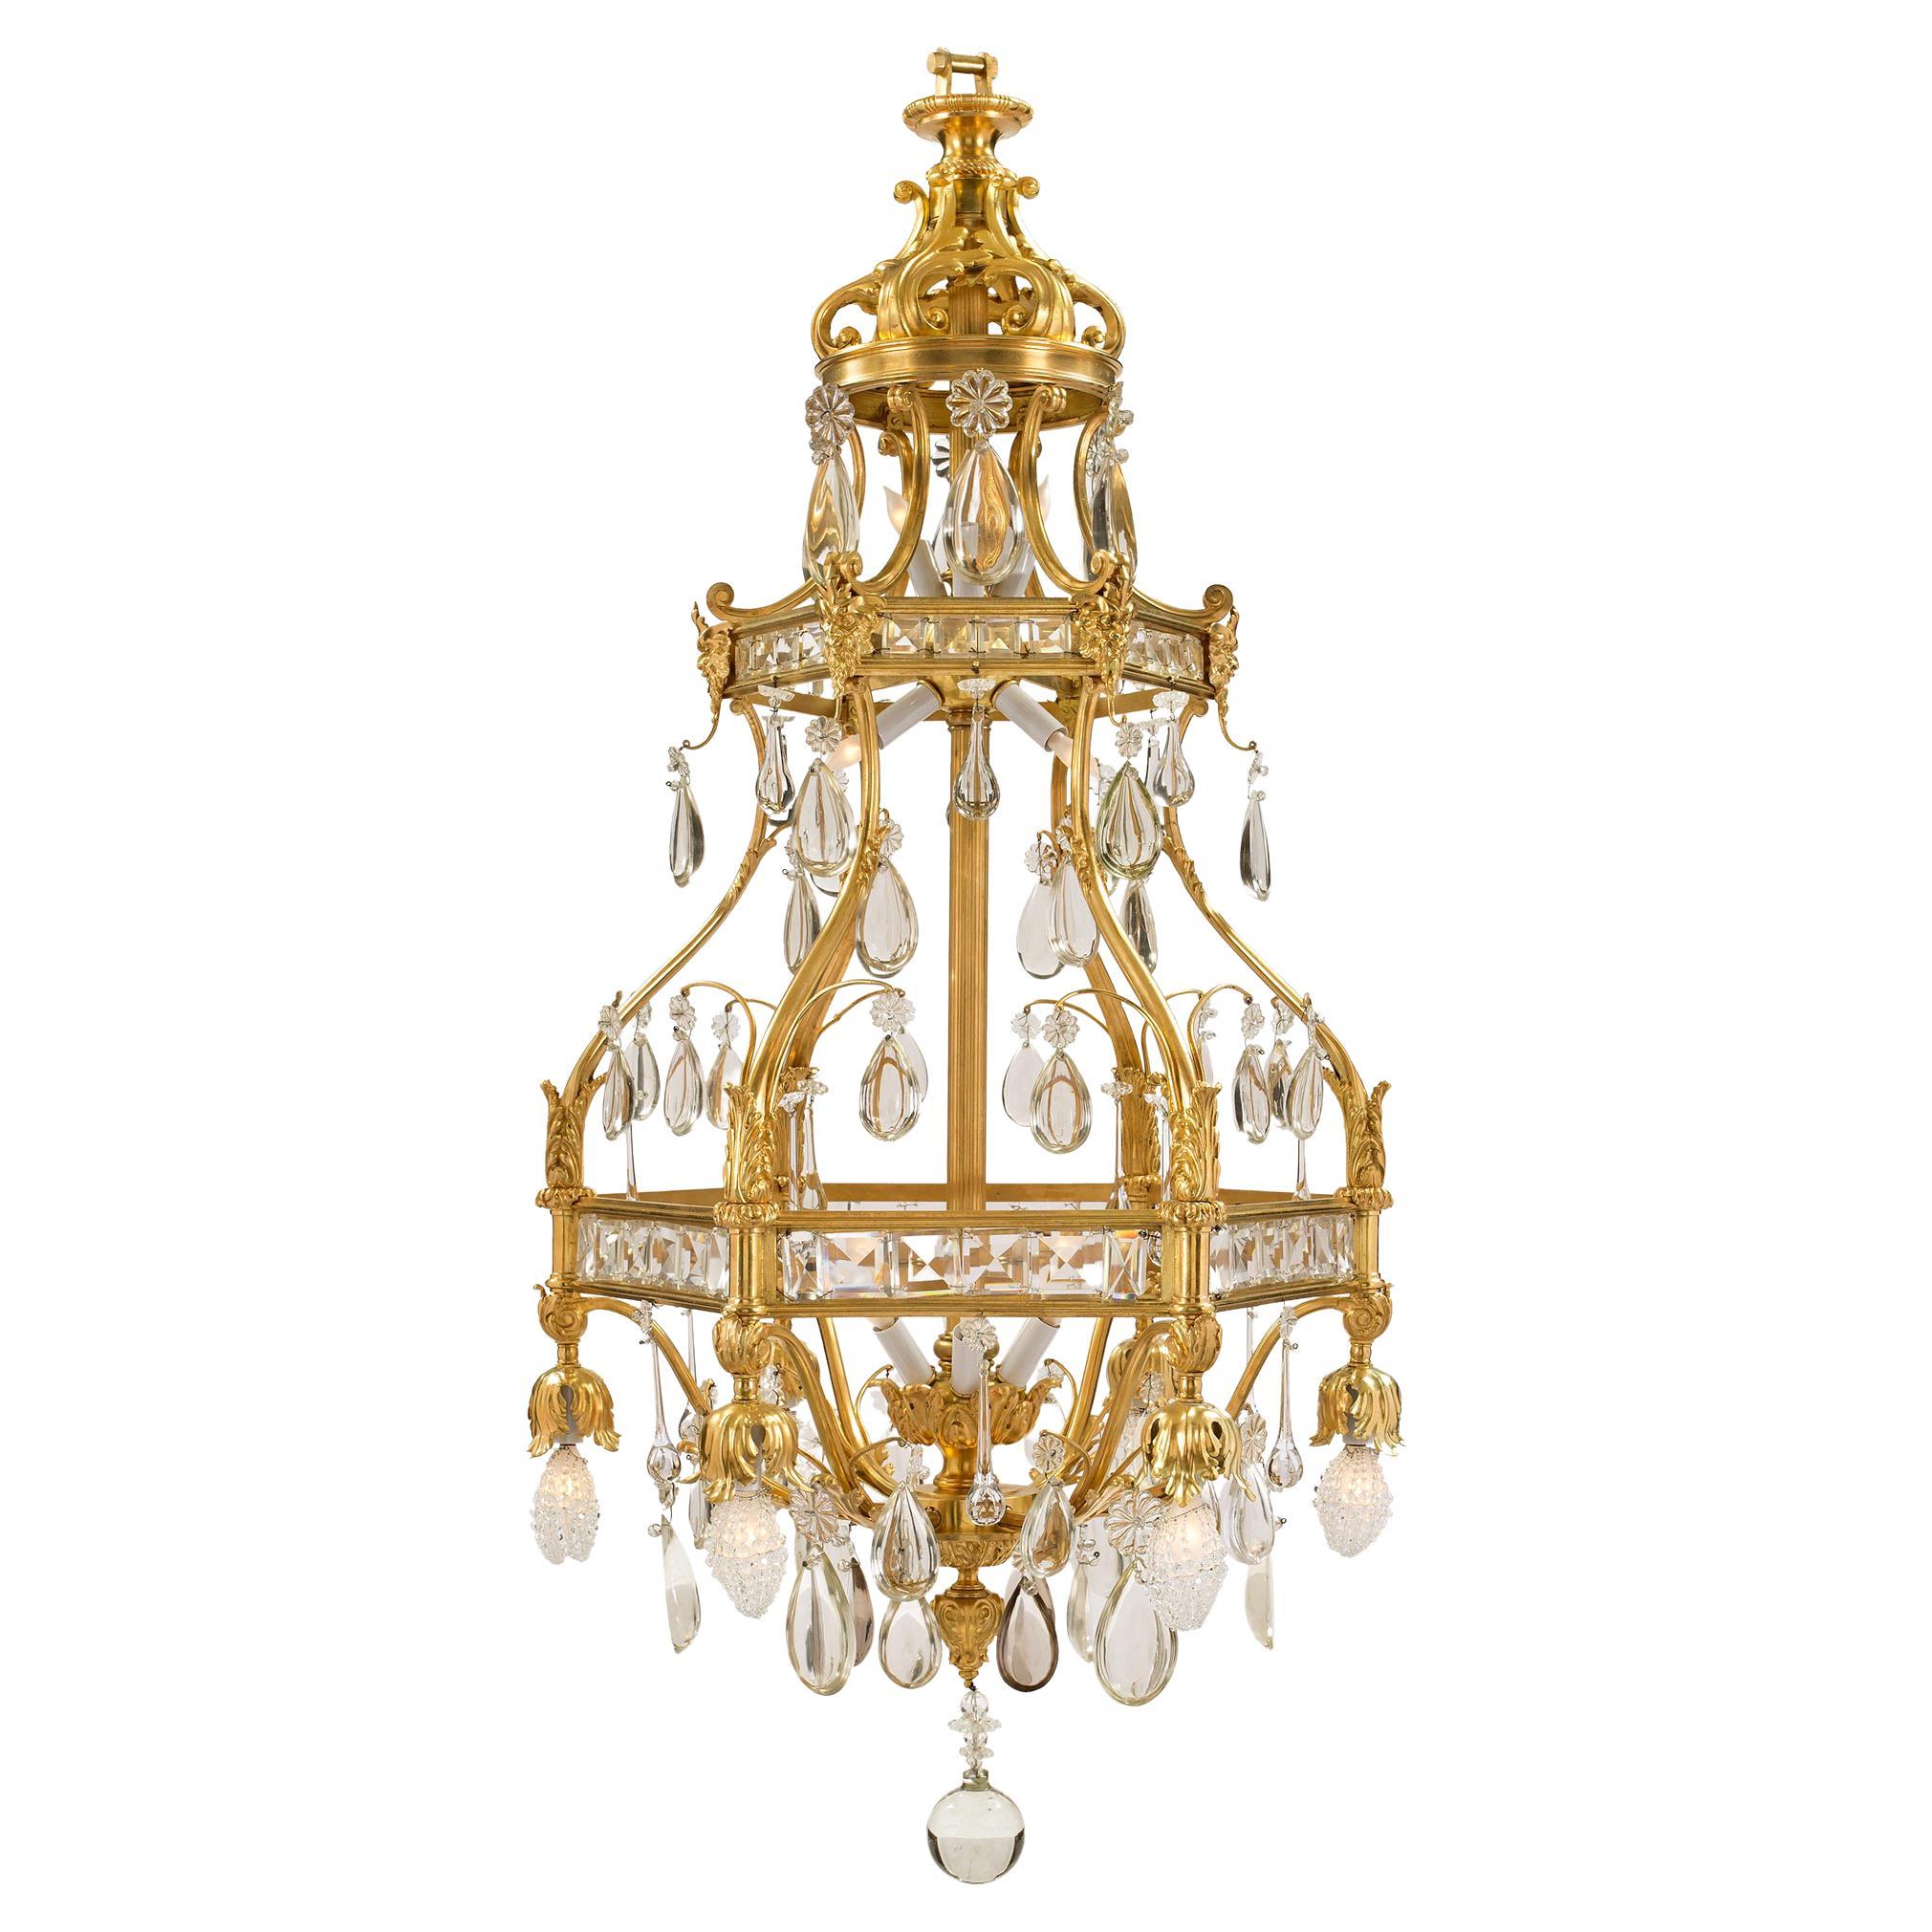 French 19th Century Louis XV Style Ormolu and Baccarat Crystal Chandelier